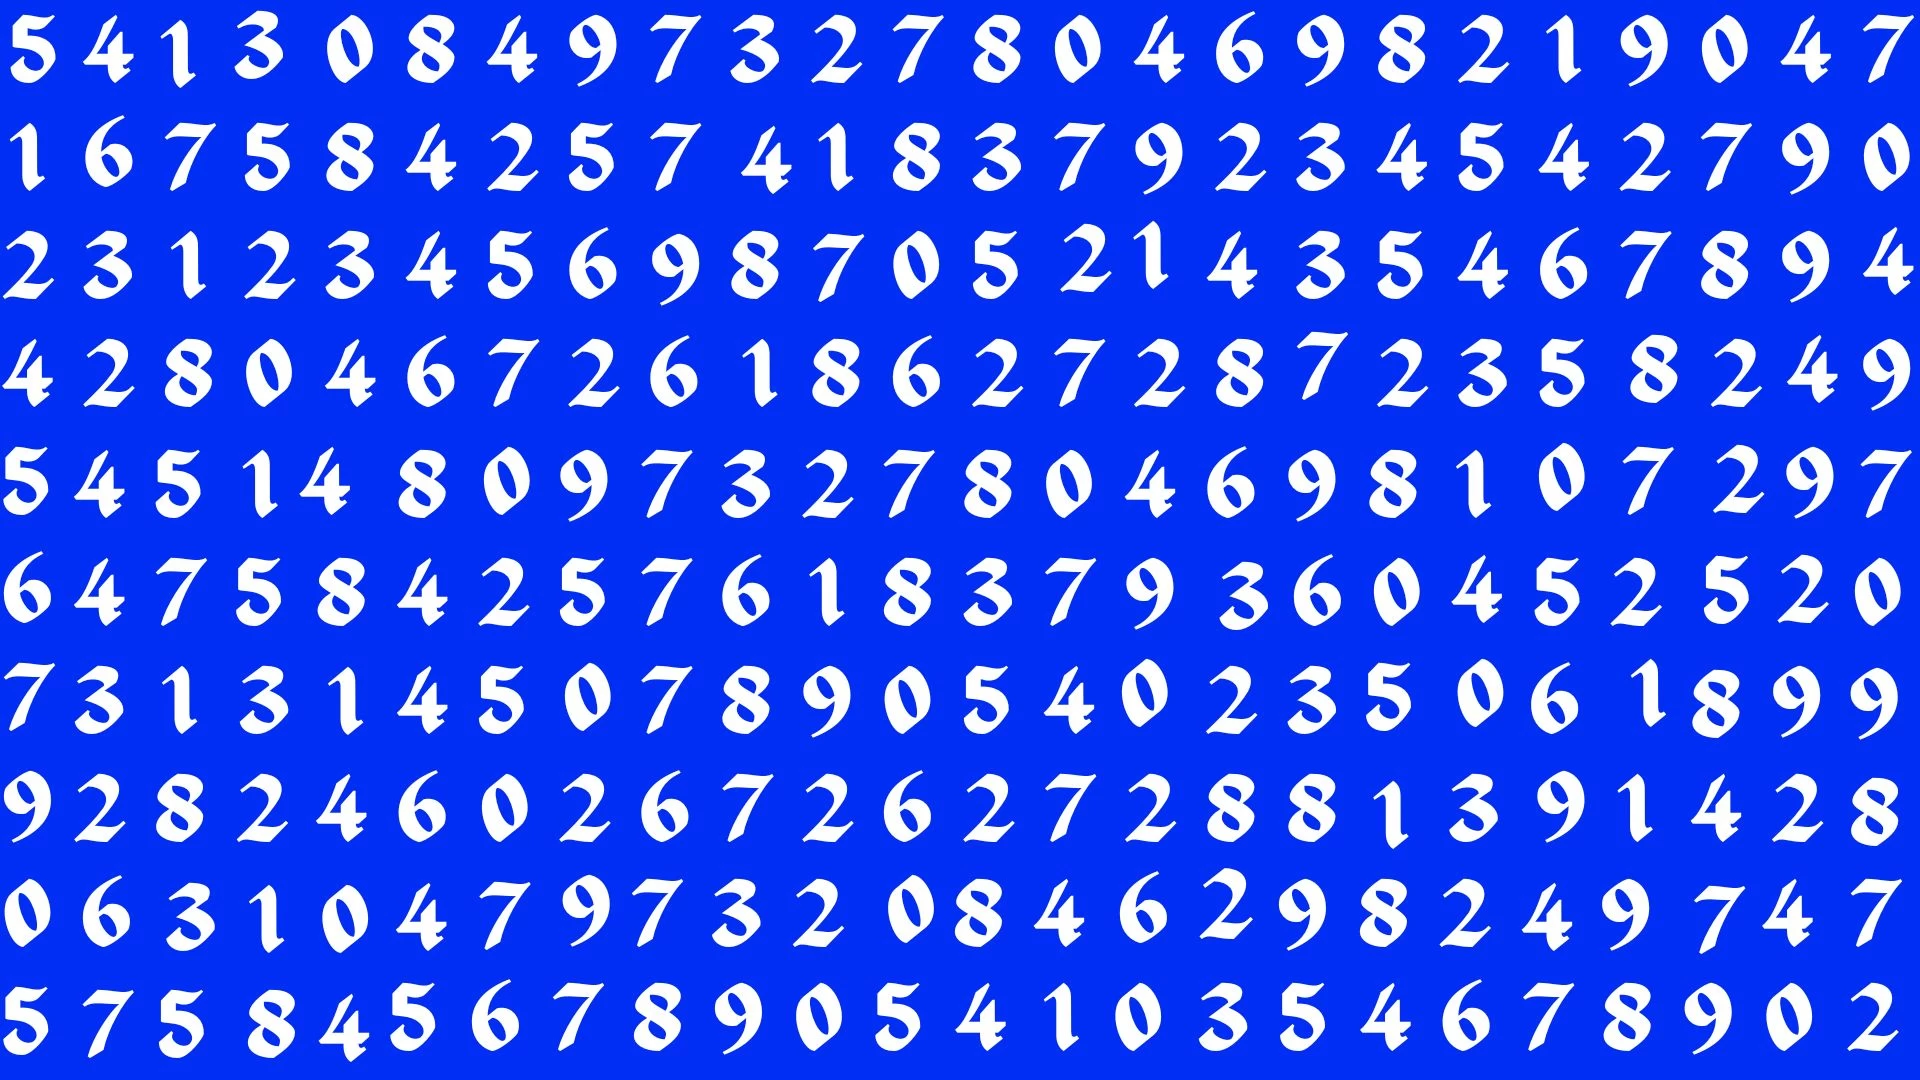 Are you smart enough to Find the Number 6968 in 12 Seconds